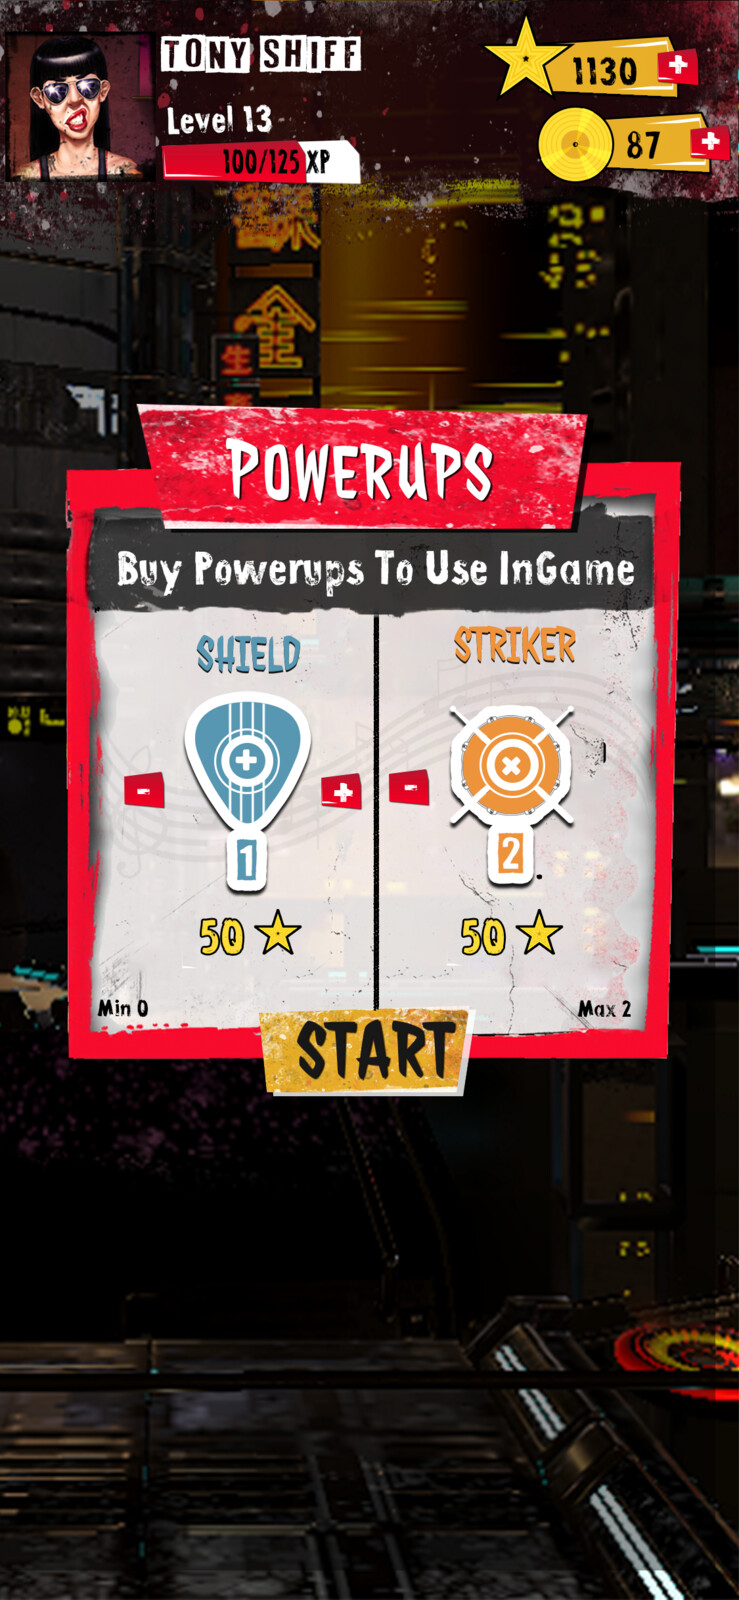 Powerups which can be purchased before the start of the game.